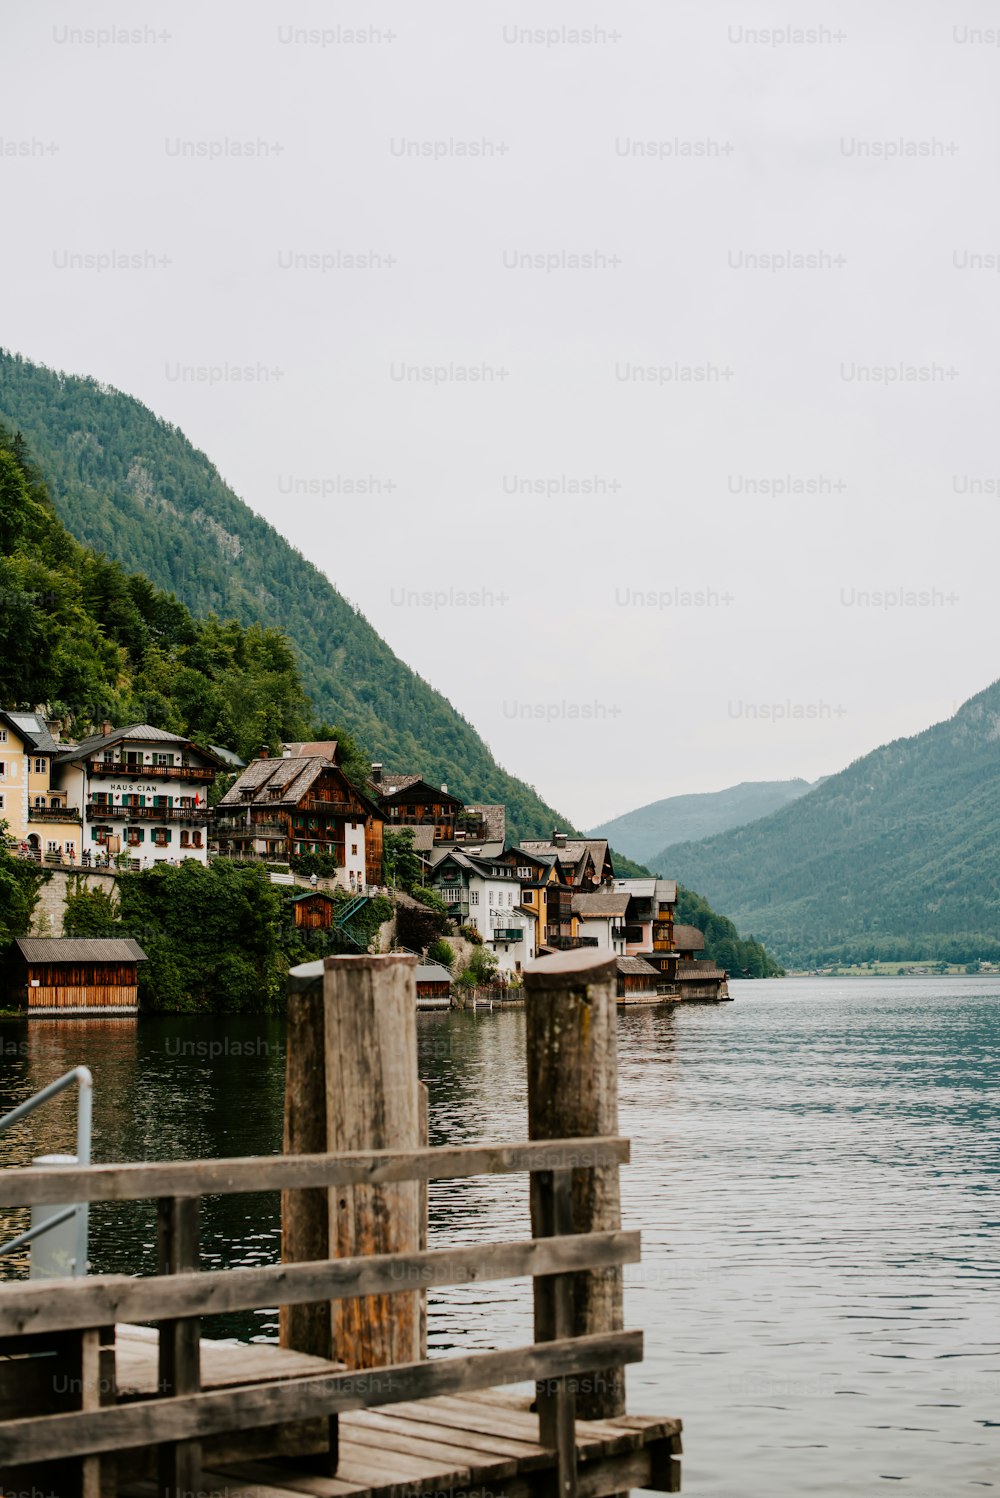 a body of water surrounded by mountains and houses